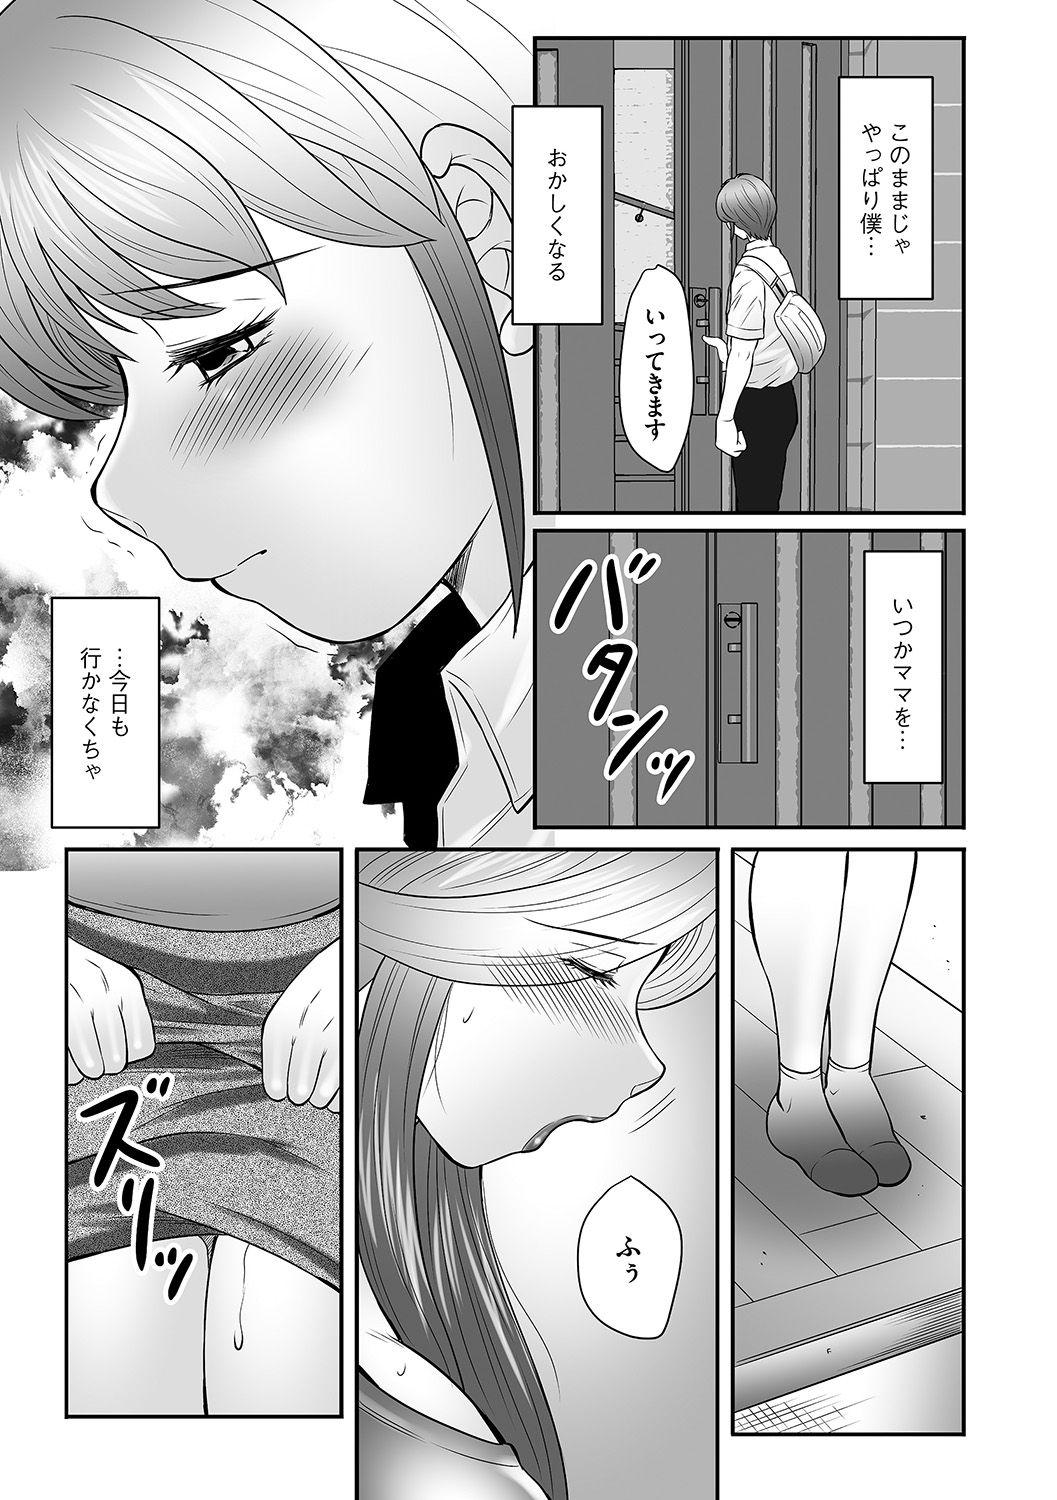 Boshi no Susume - The advice of the mother and child Ch. 14 4